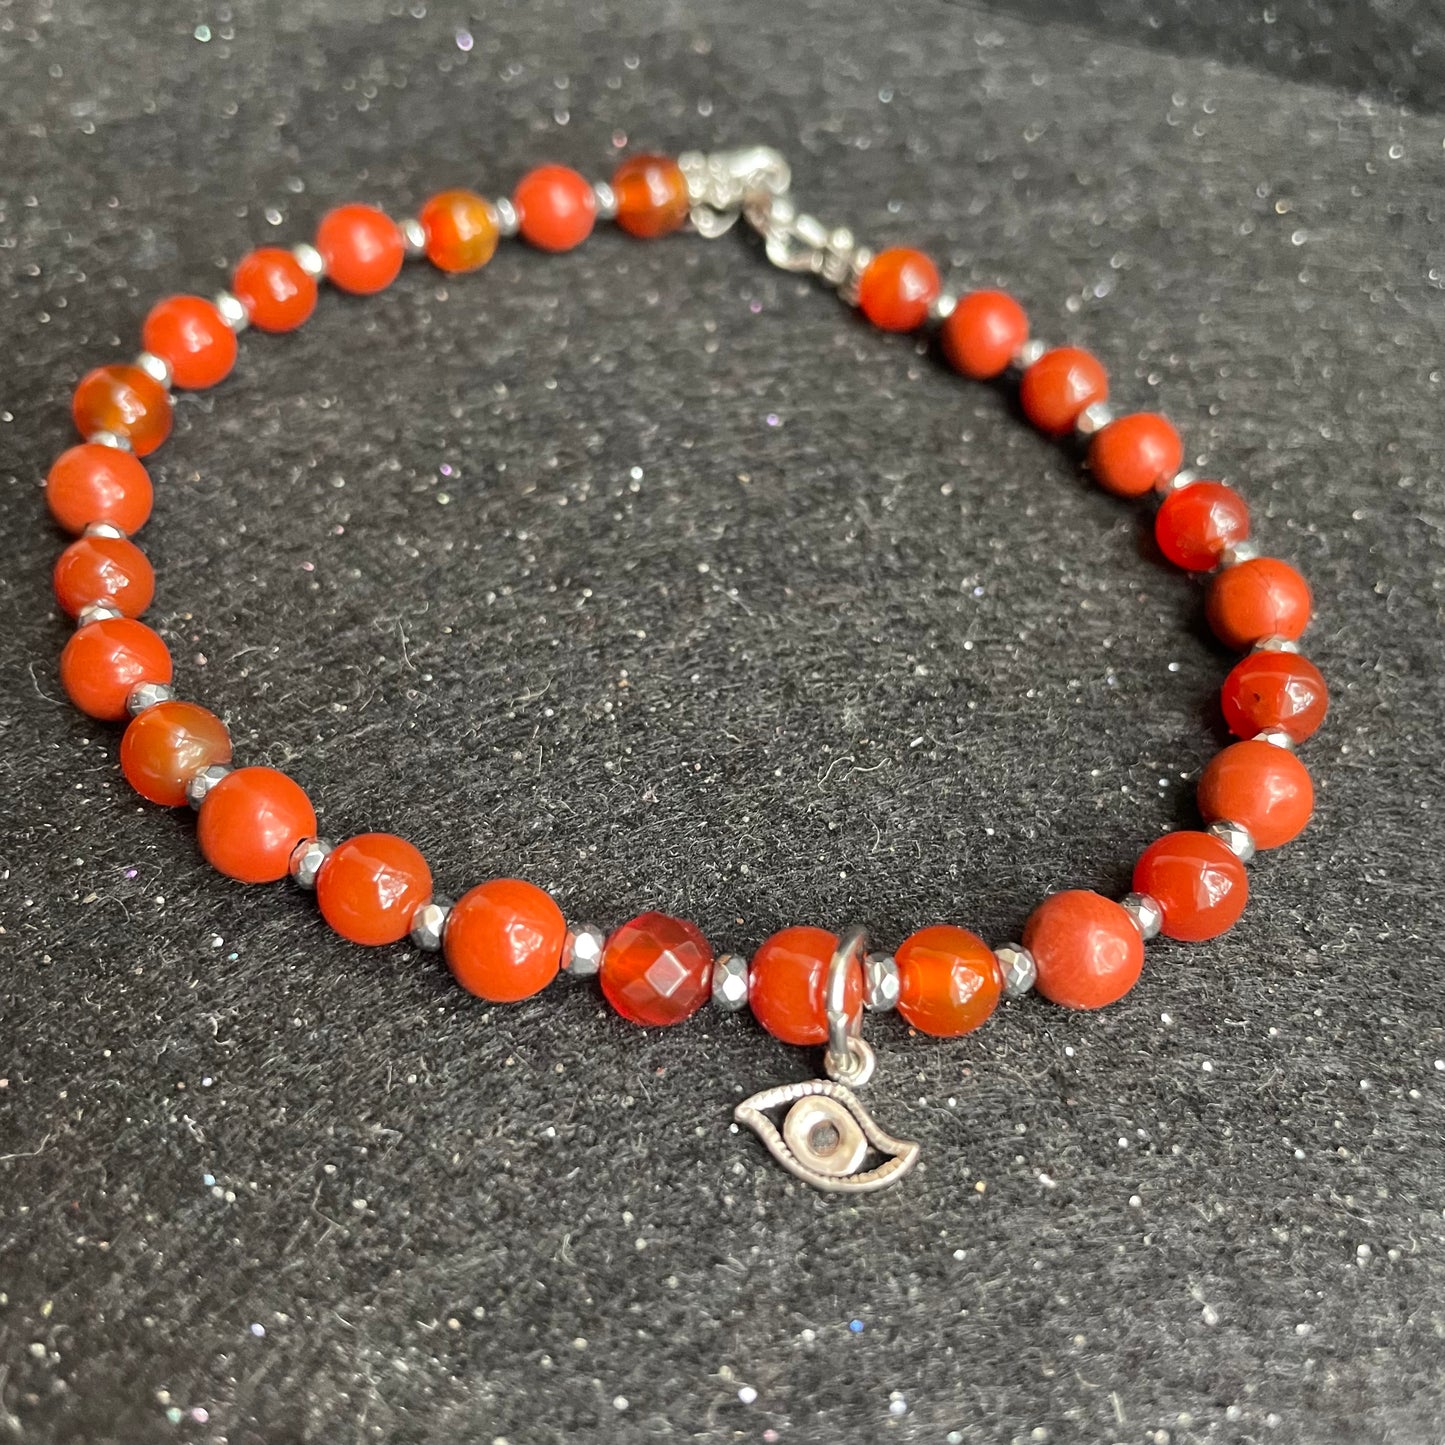 Red Jasper and Carnelian with Evil Eye charm